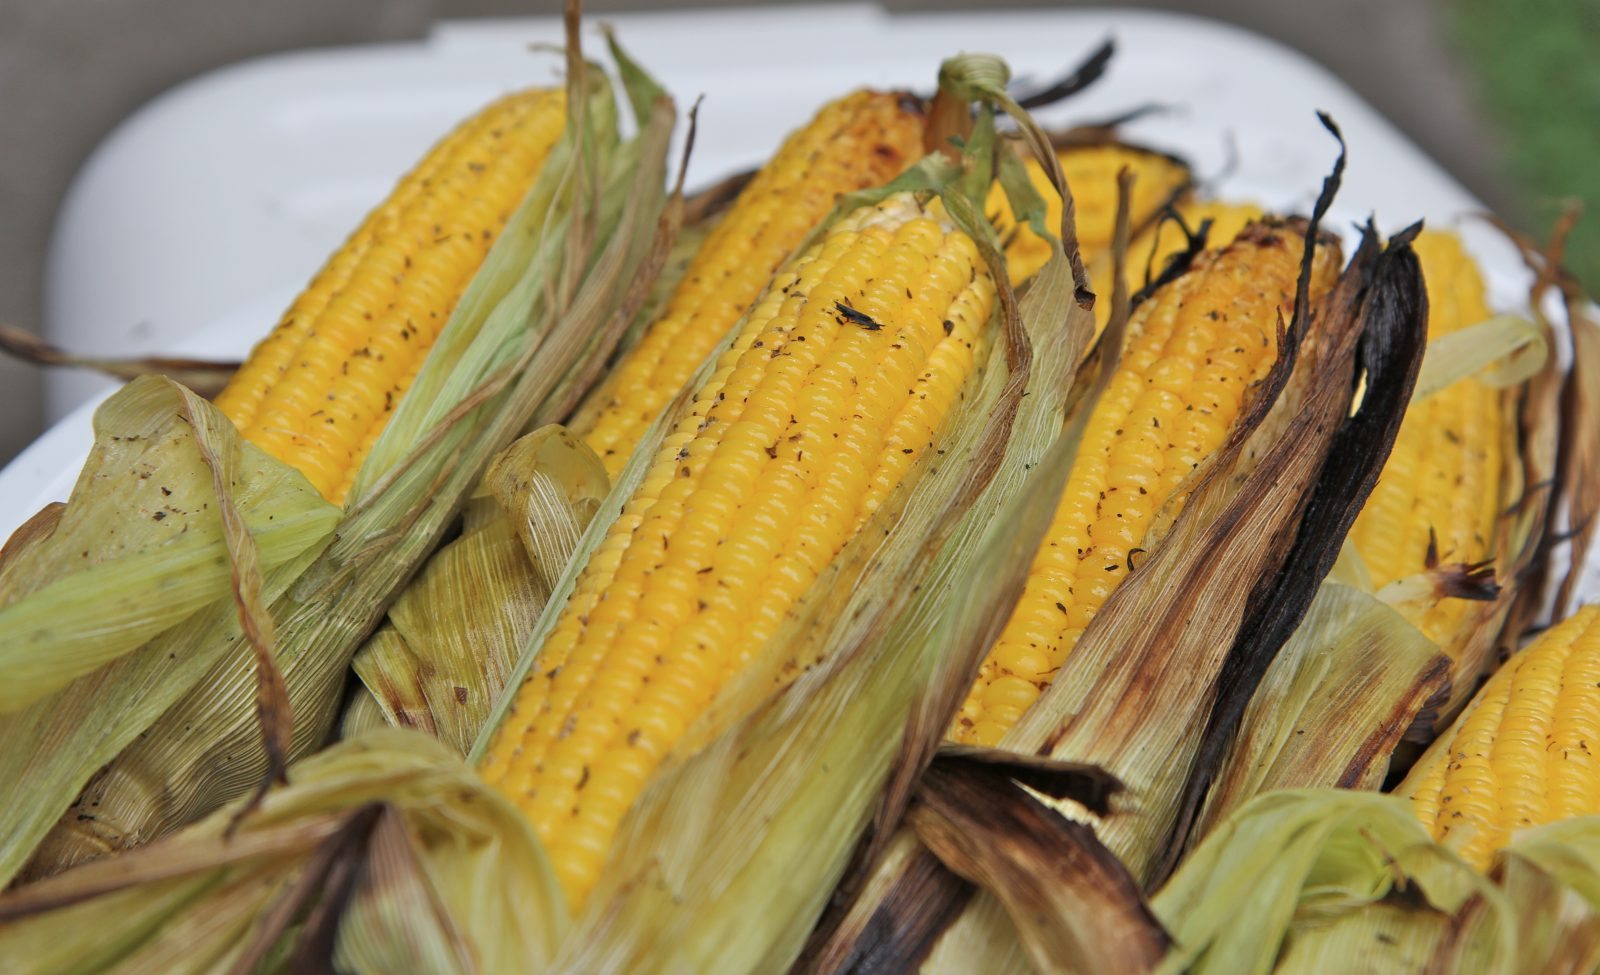 Easy Grilled Corn On The Cob Recipe,Tom Collins Cocktail Variations